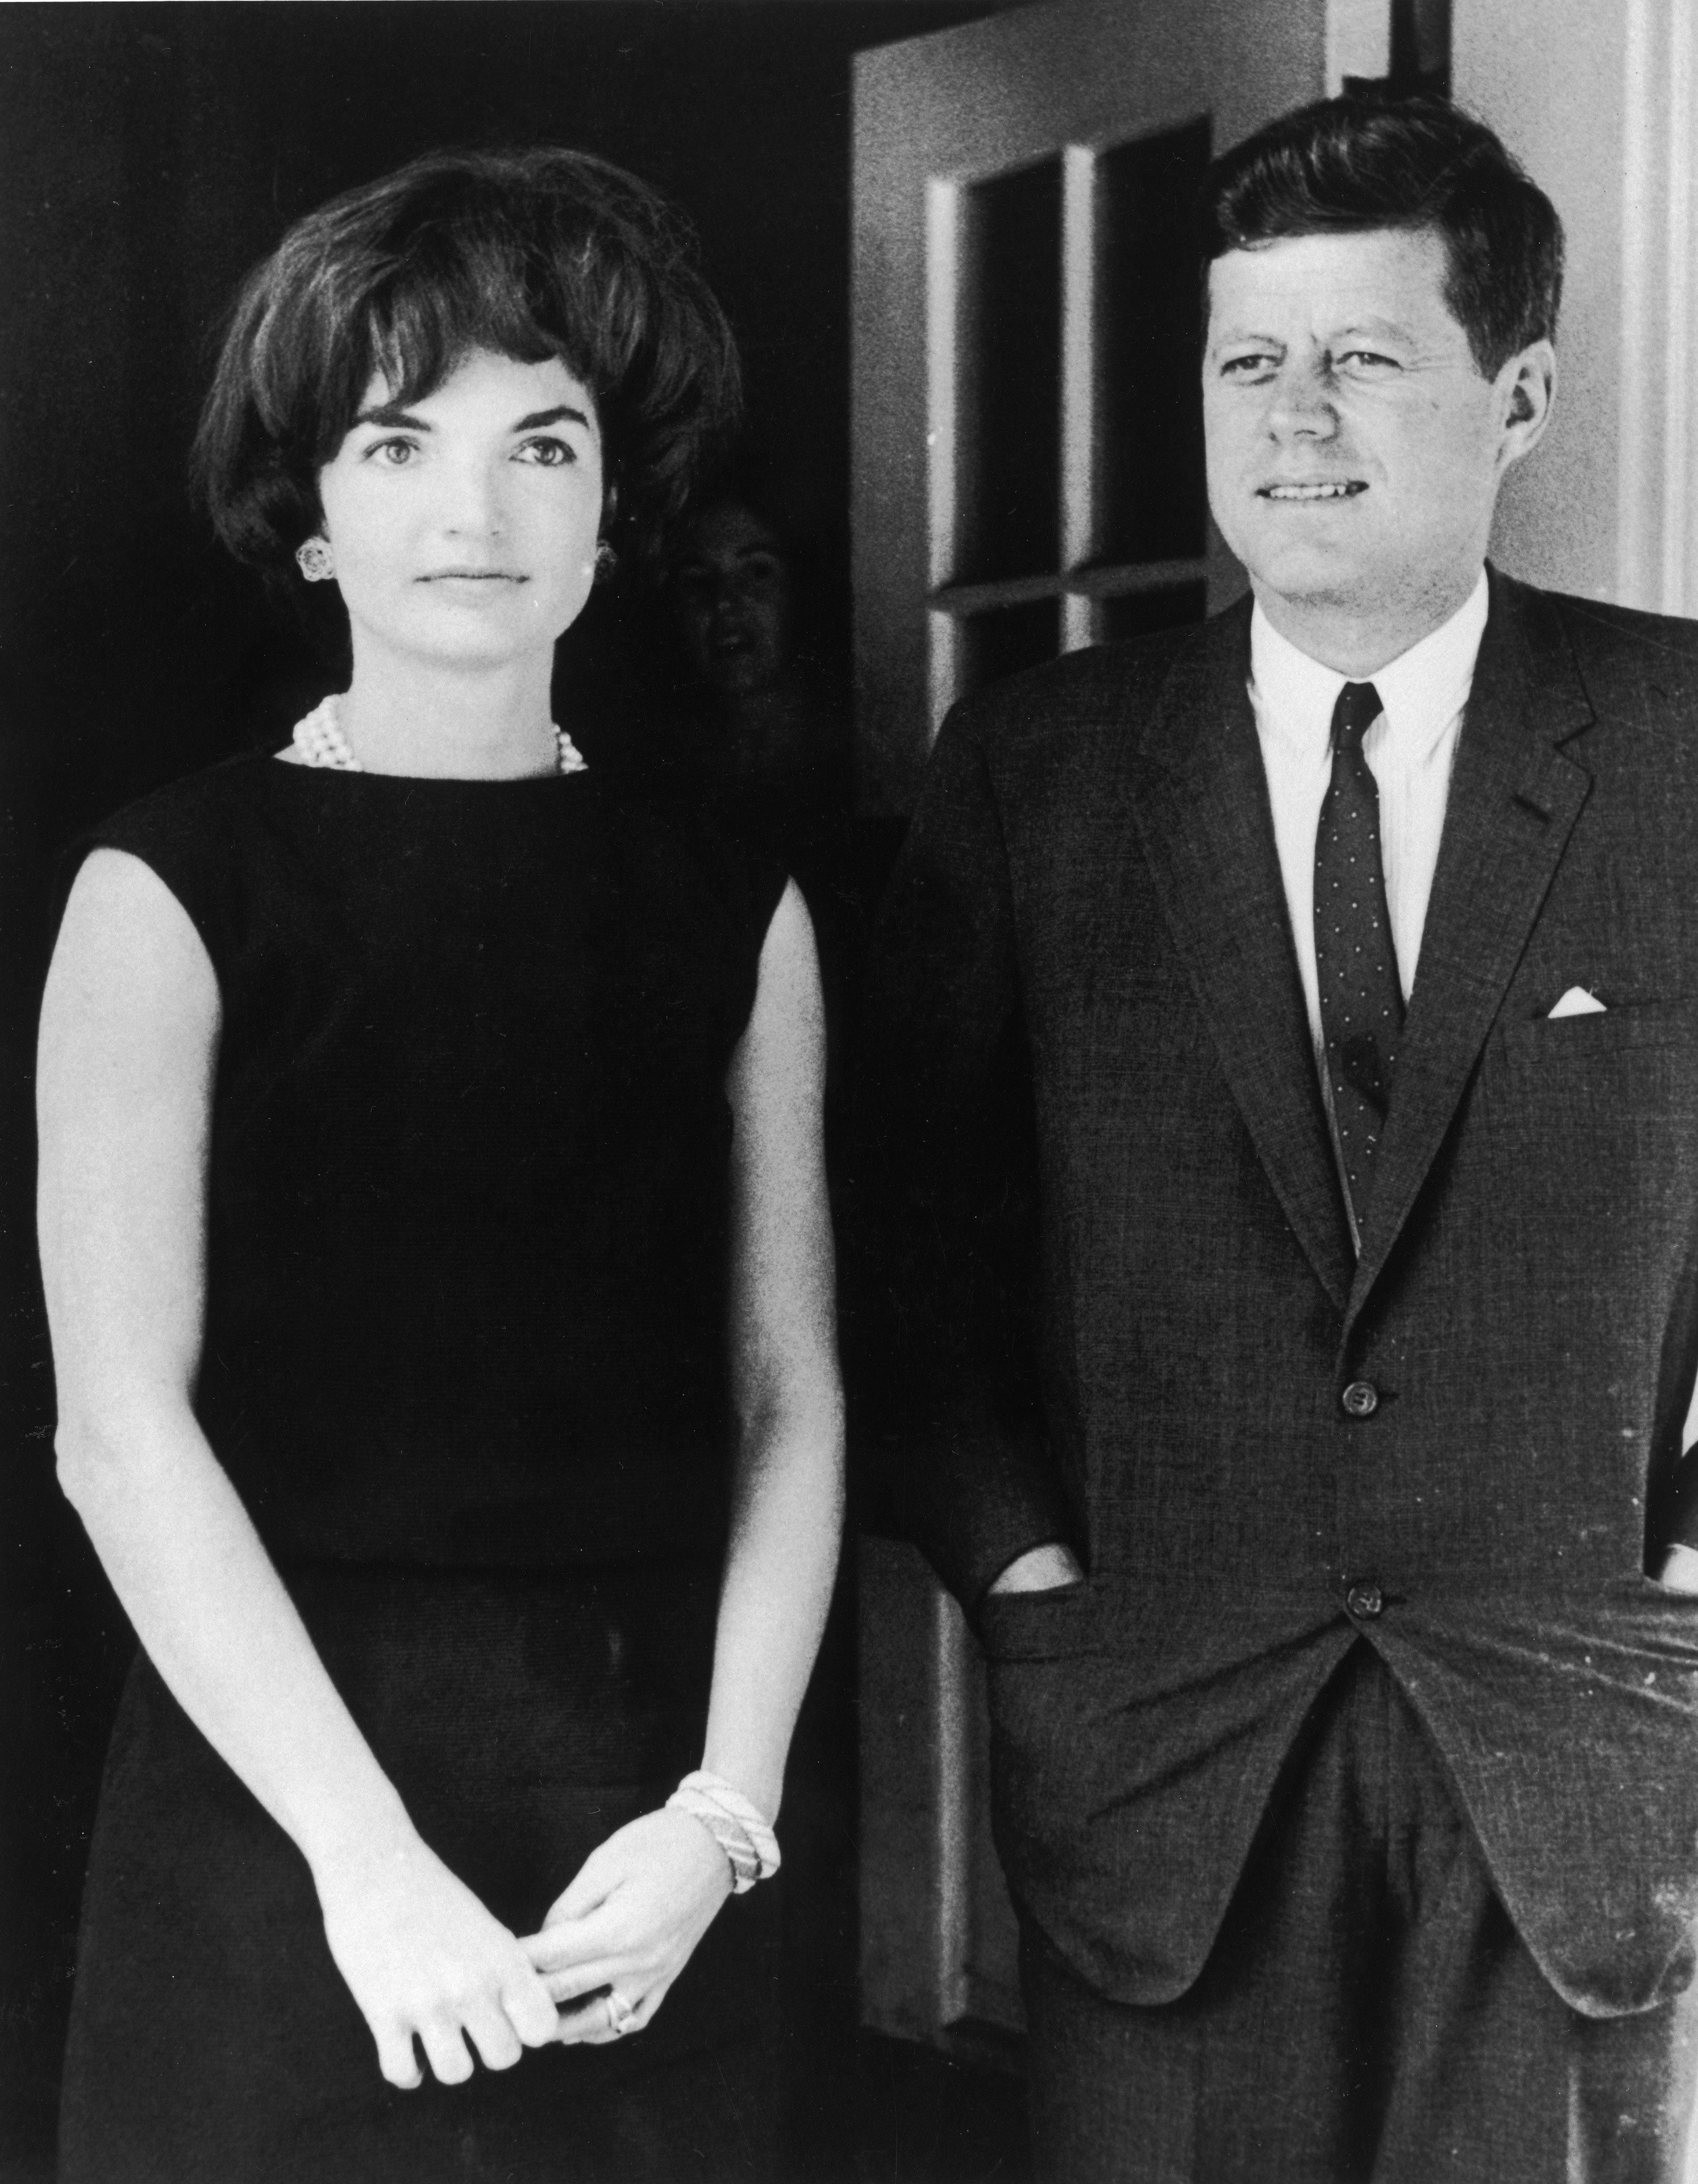 Jacqueline Kennedy and John F. Kennedy at White House, Washington, D.C., circa 1961. | Source: Getty Images